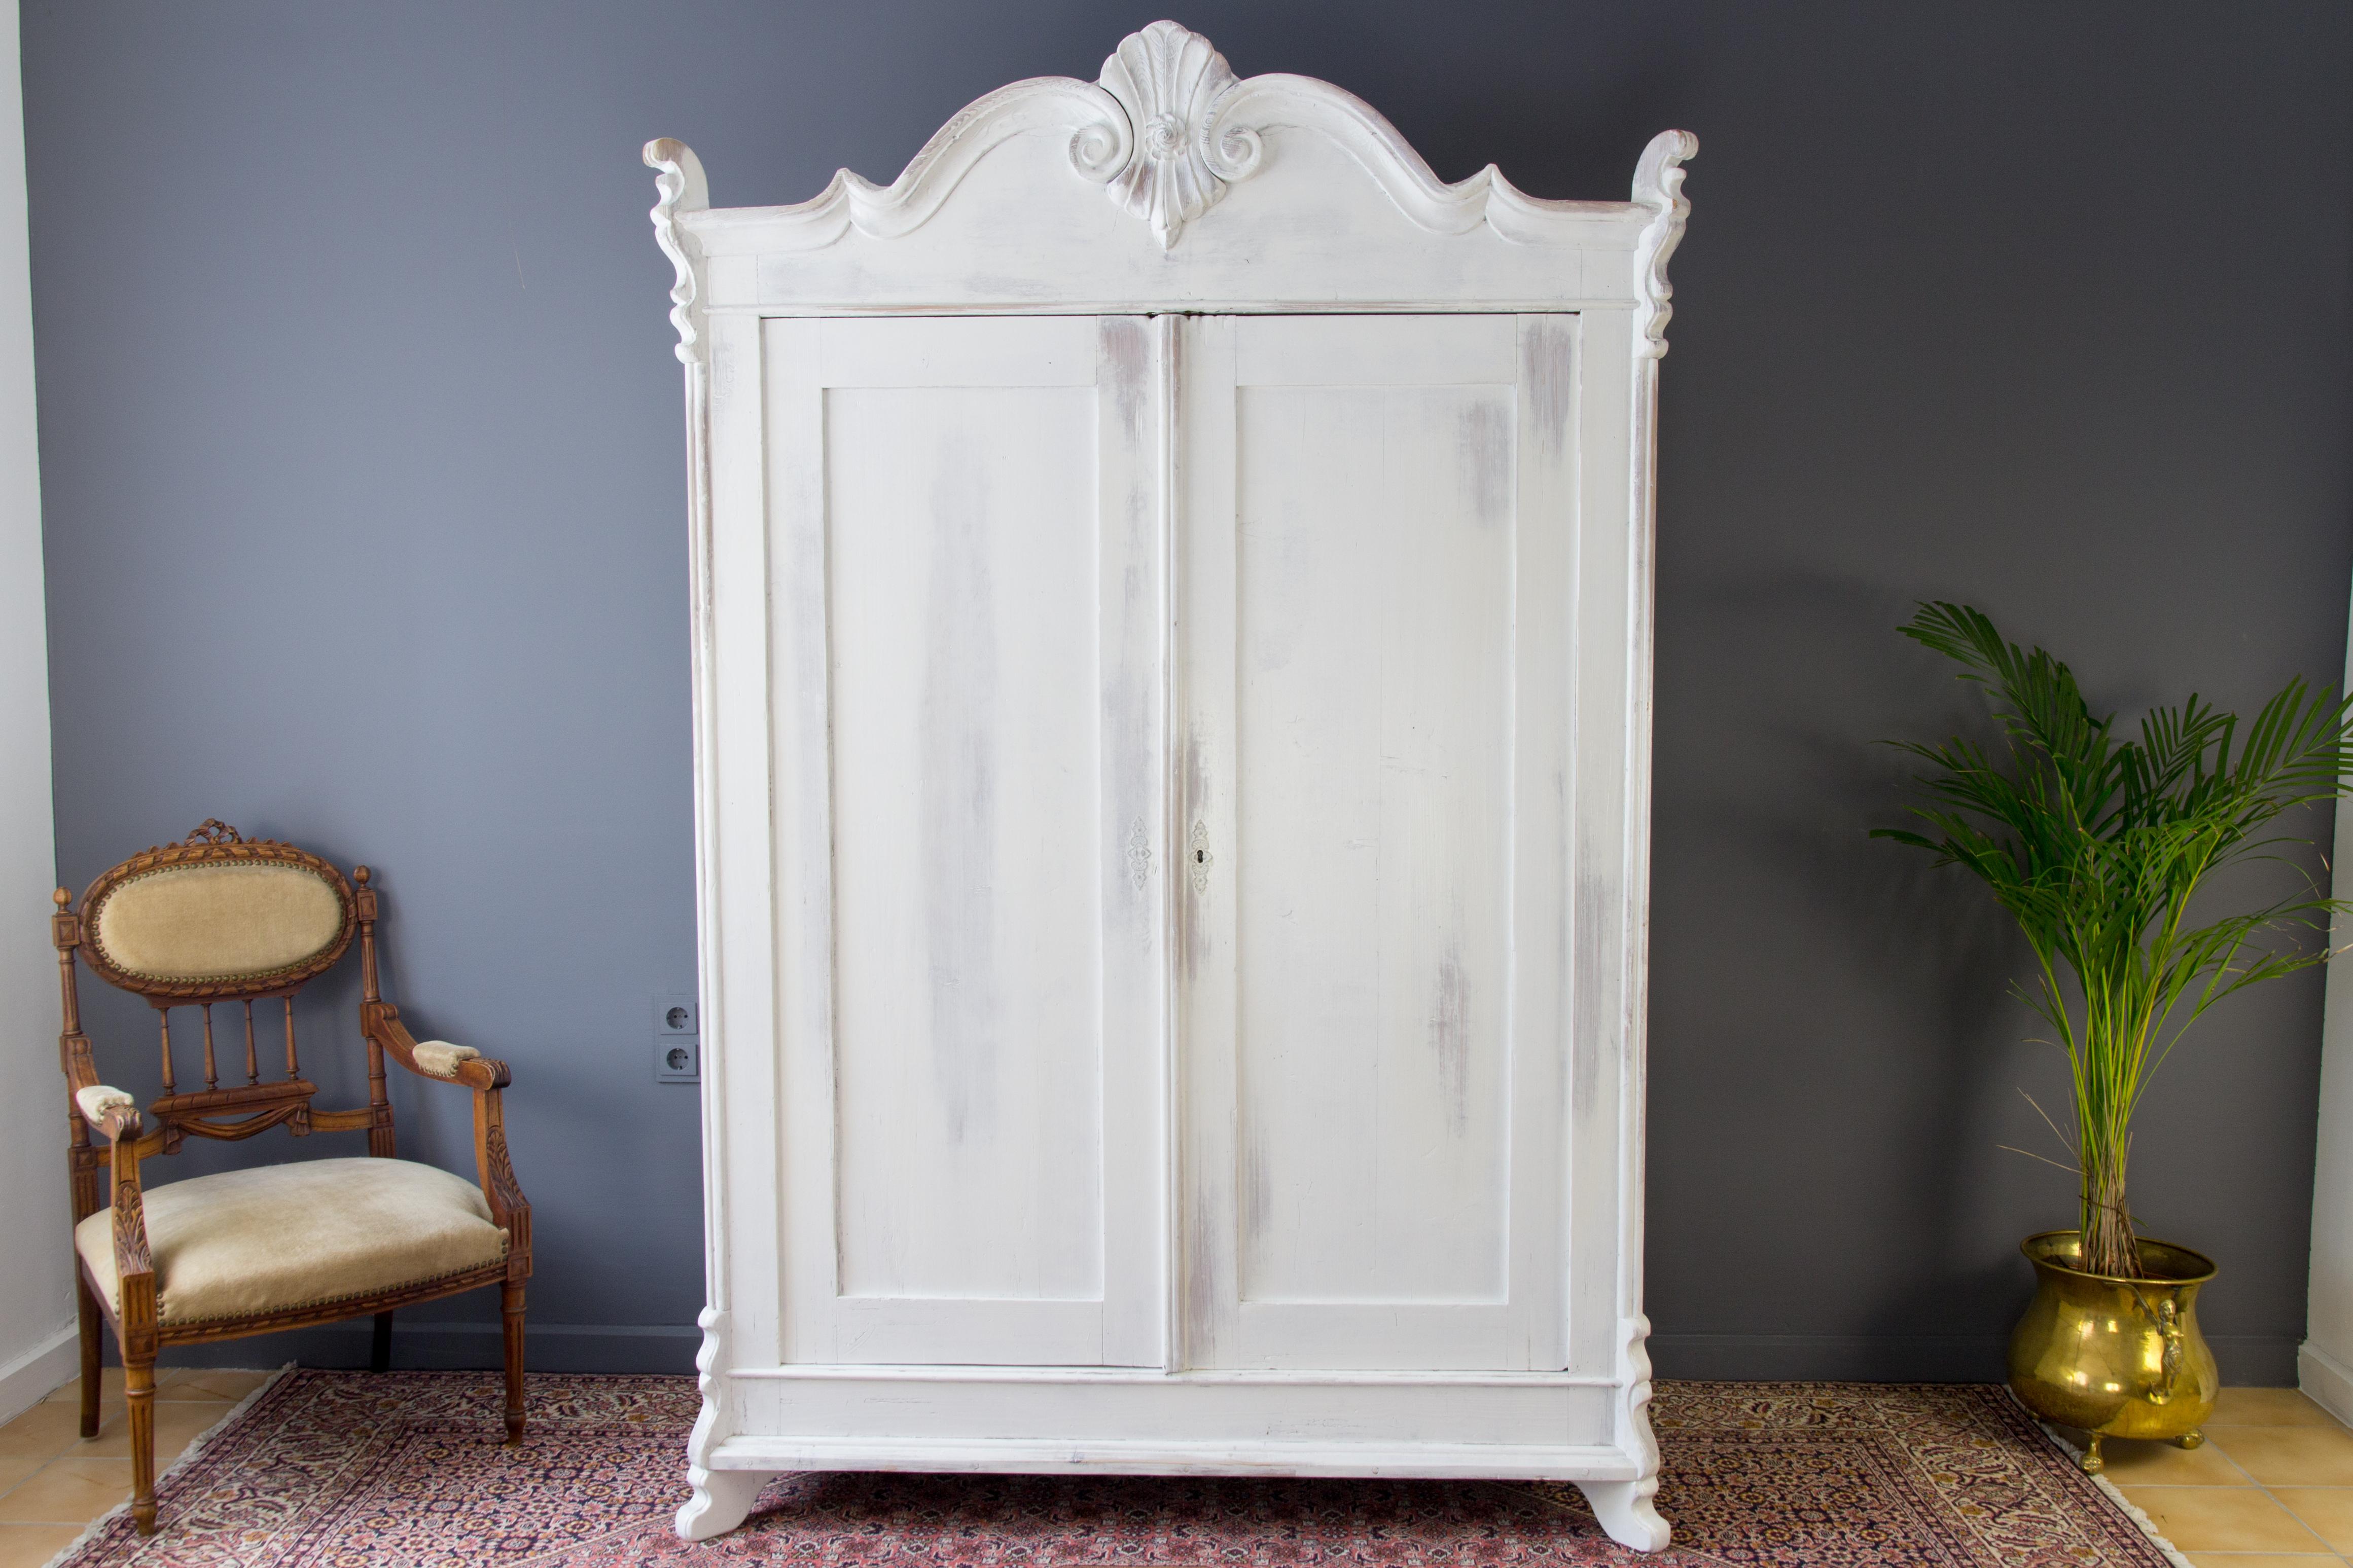 Two-door armoire of Baltic pine with five shelves. The exterior front side is white painted. Inside, the pine remains in its raw color. One side is equipped with five shelves, the other - with original clothes hangers and one shelf. The wardrobe is